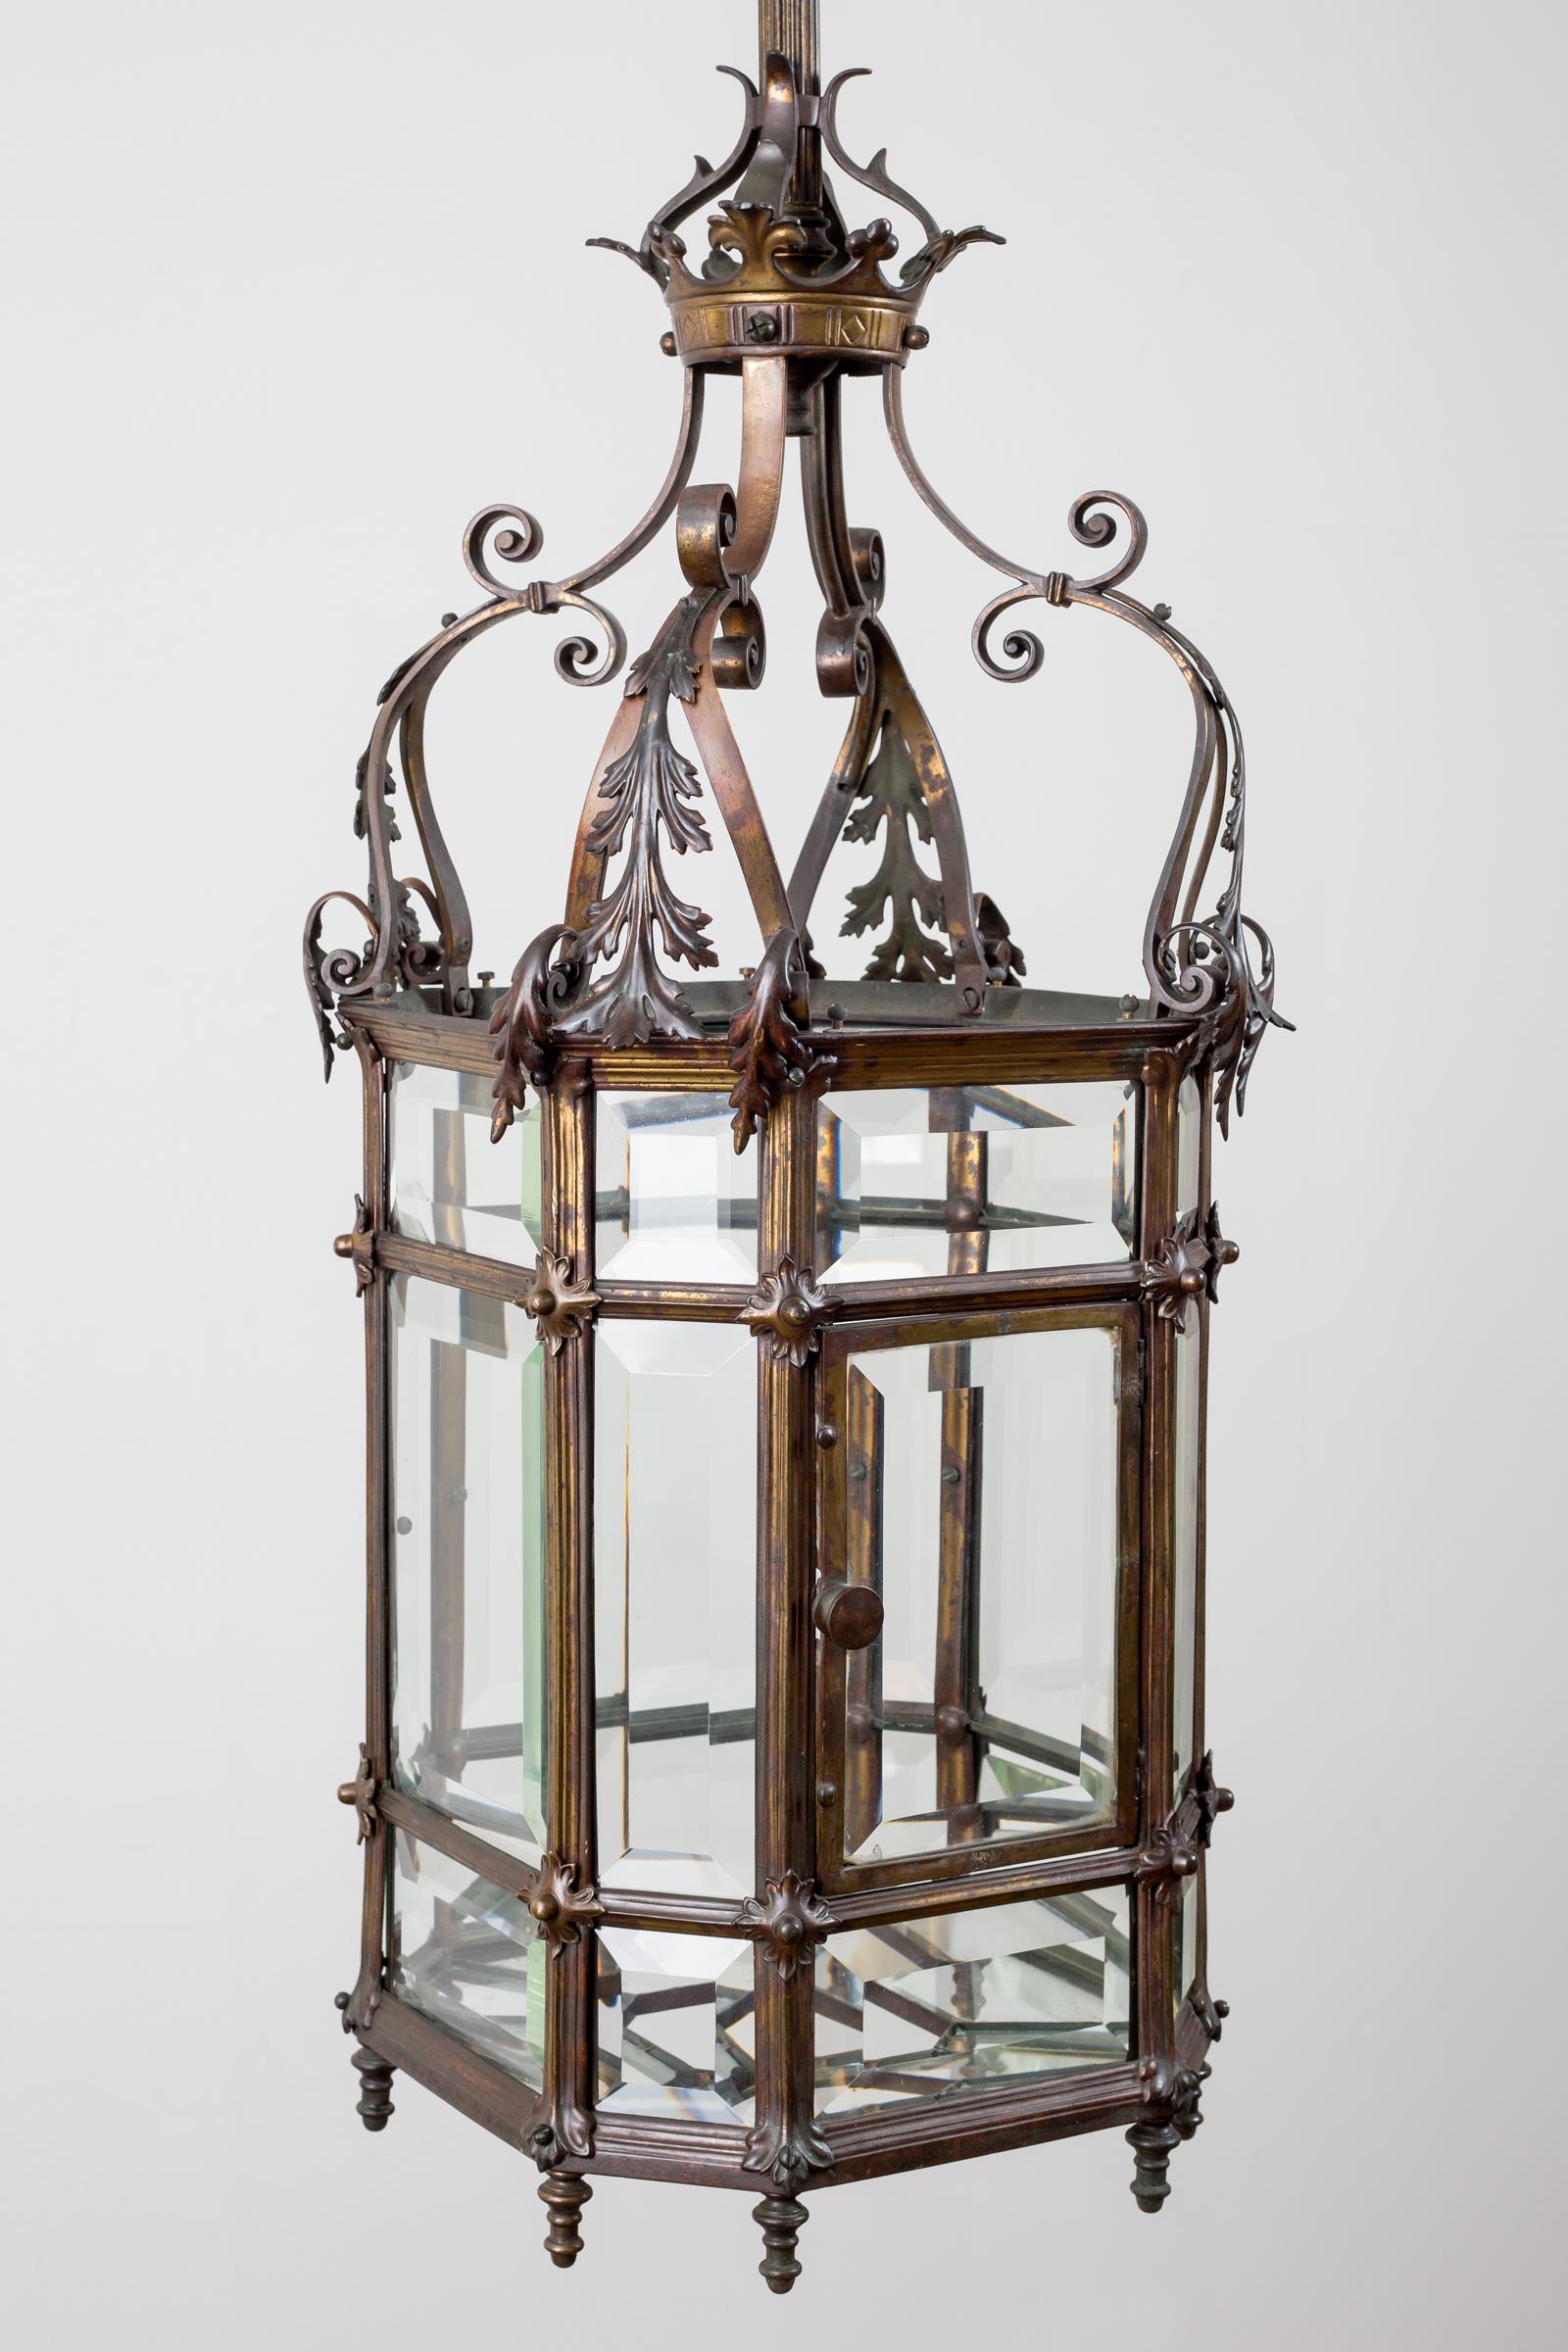 Gothic reform bronze octagonal partially gilded lacquered lantern with beveled glass plates and a surmount of C-scrolls, open scrolling leaves, topped by a crown. The original long reeded hanging rod can be cut to any length.
It has been